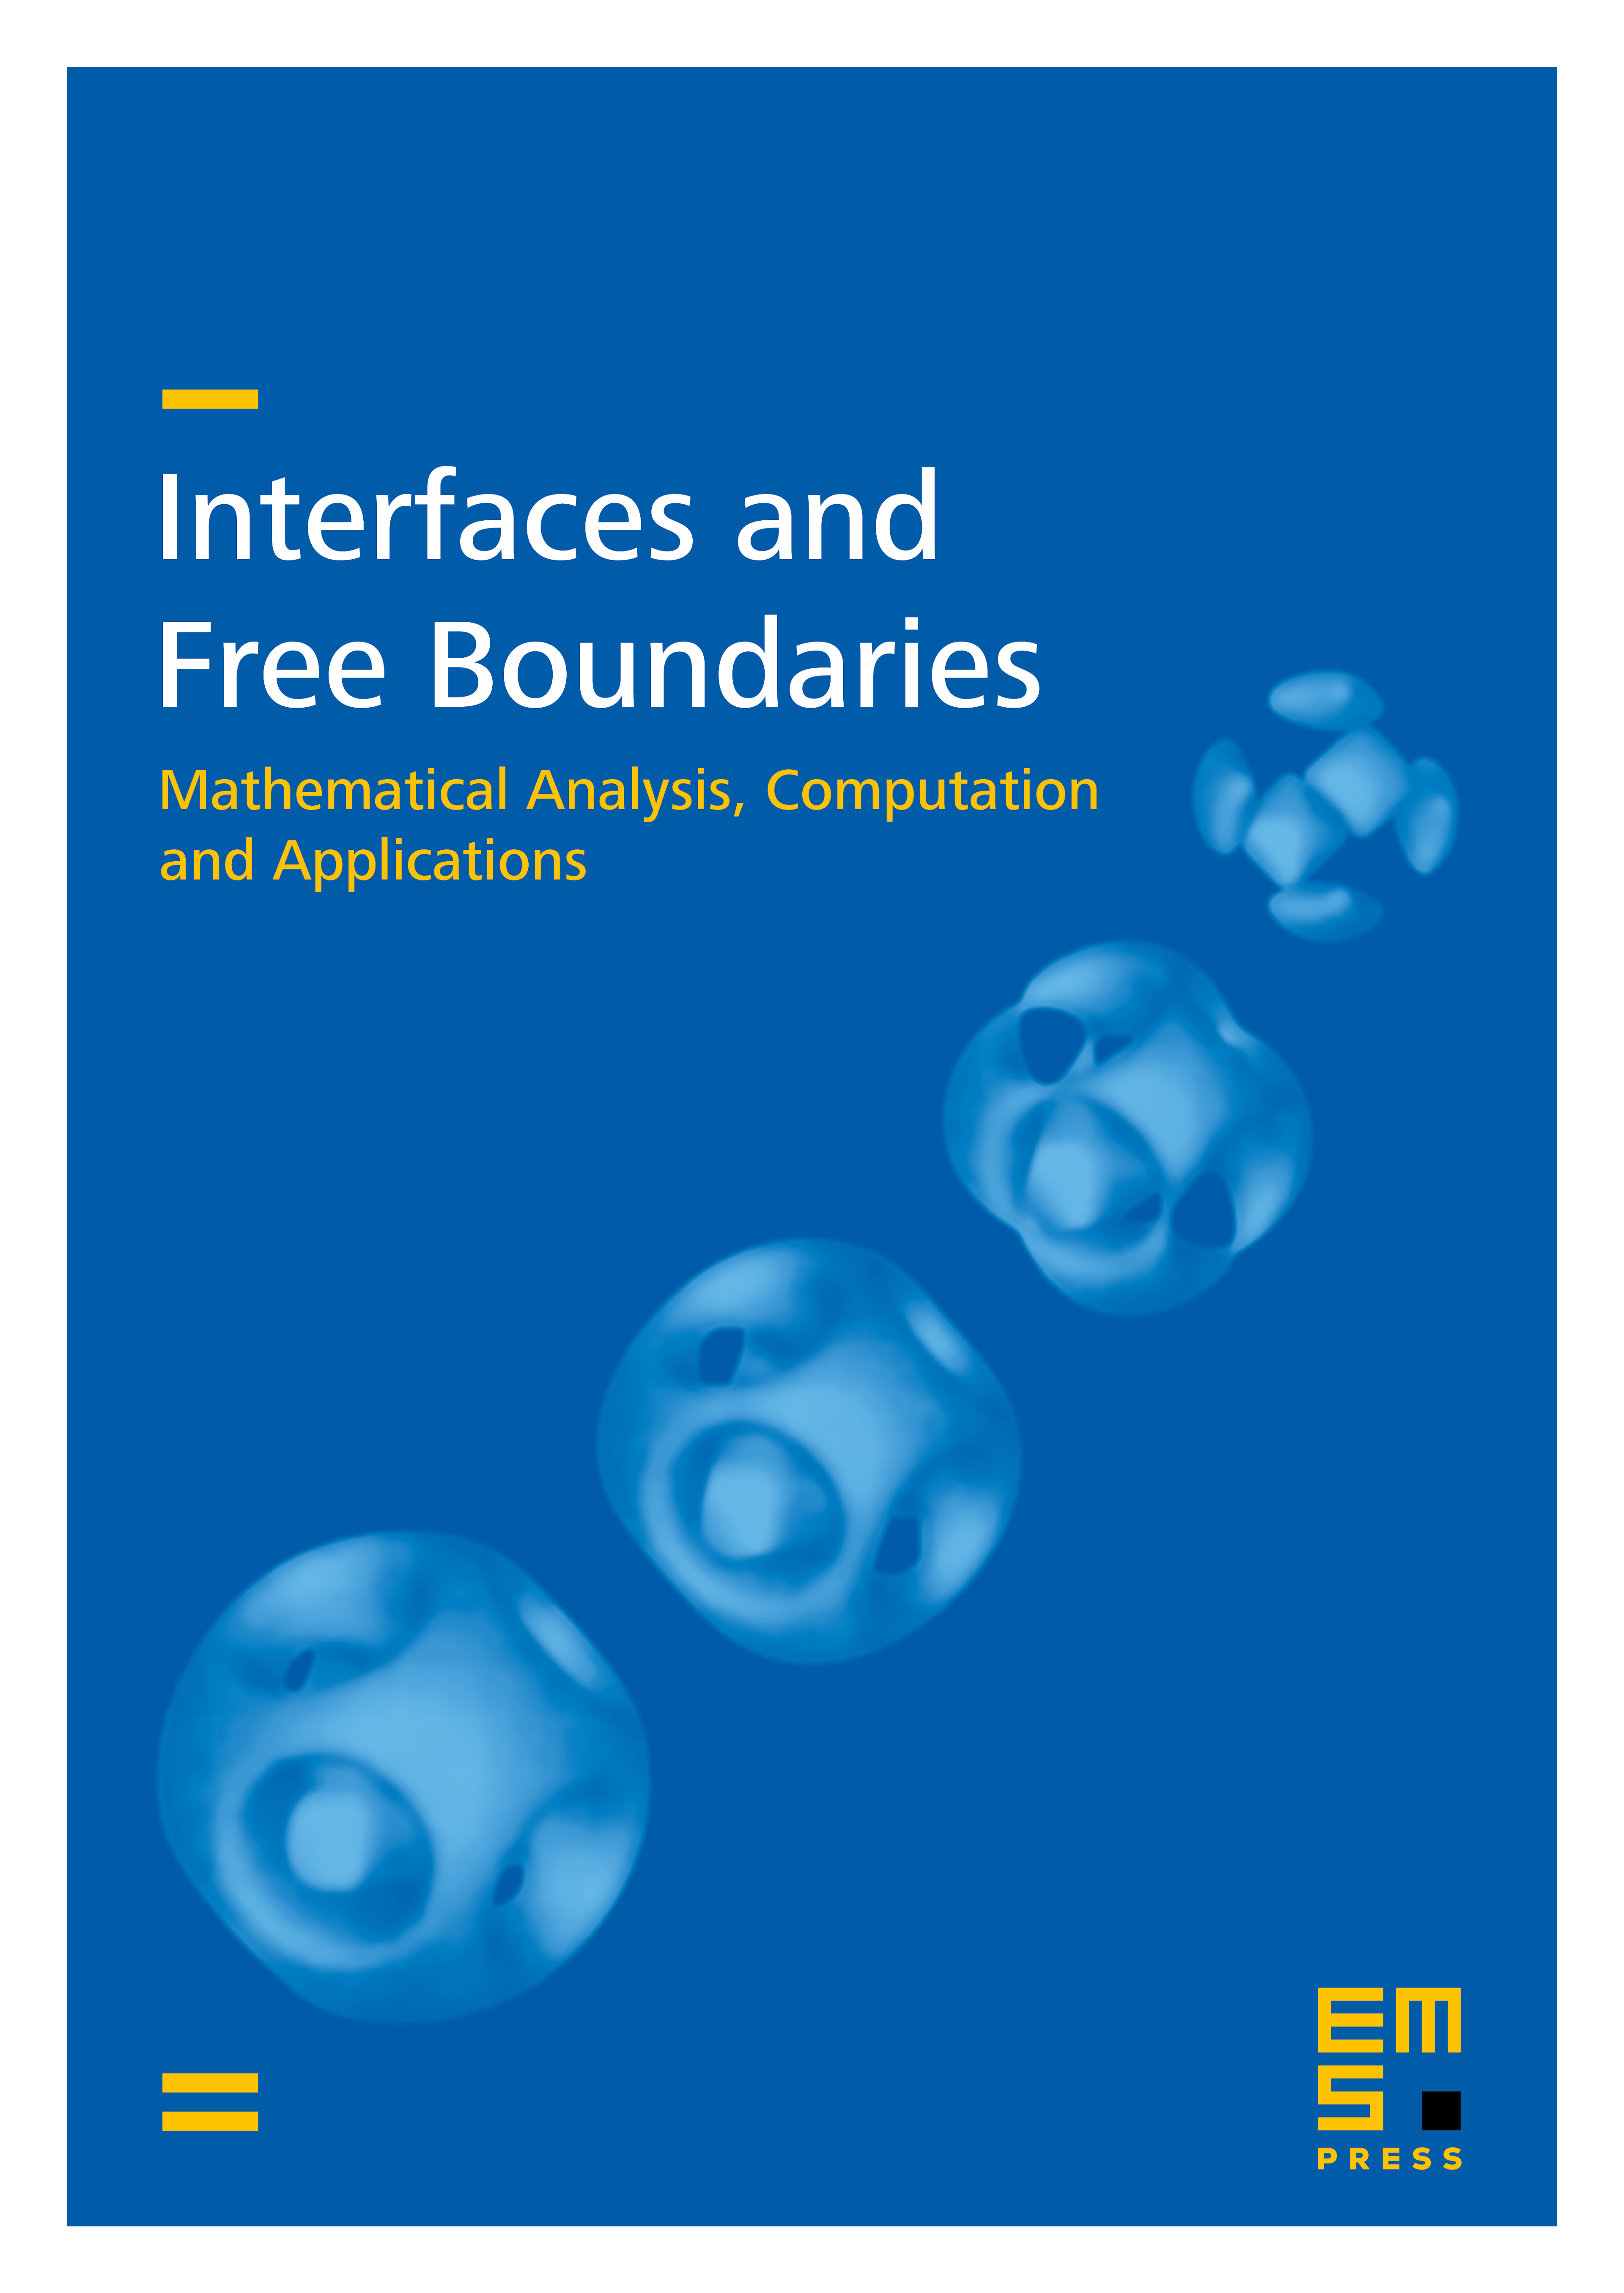 Quantitative analysis of finite-difference approximations of free-discontinuity problems cover